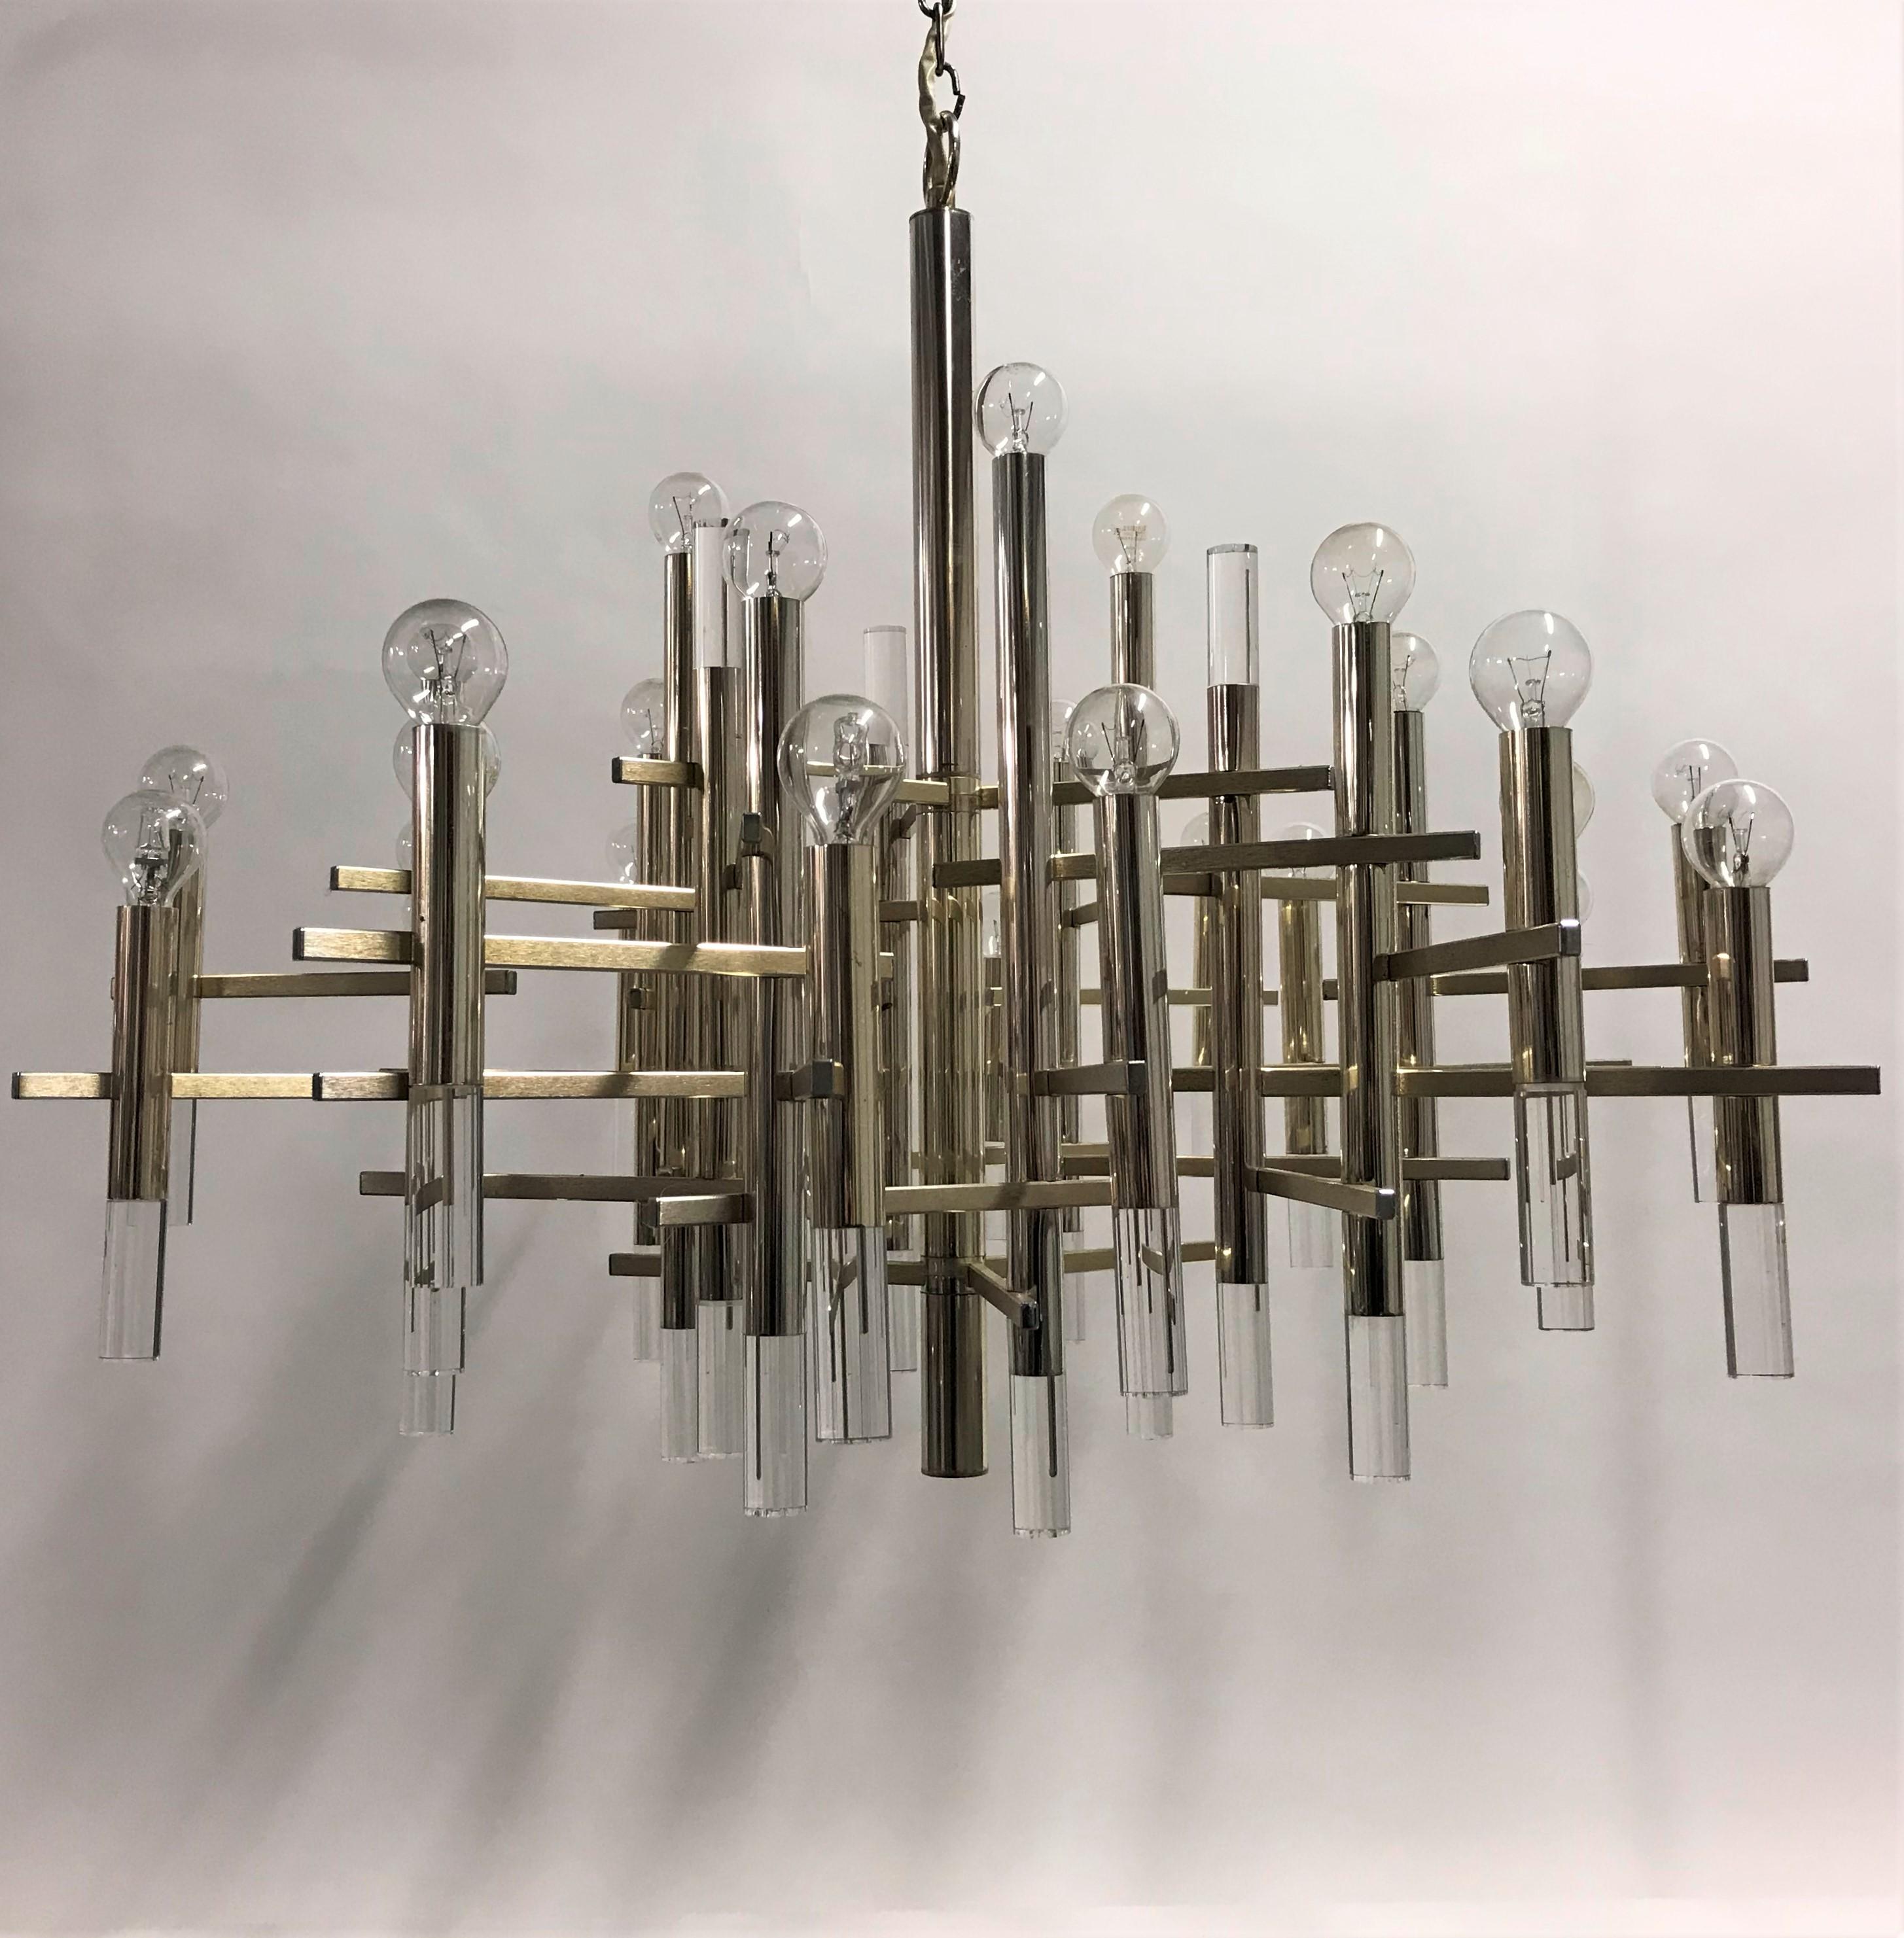 Huge Mid-Century Modern chrome and Lucite chandelier by Gaetano Sciolari.

The chandelier has 26 E14 light points, all tested and ready for use.

The chandelier really has a 'wow' effect due to it's size and beautiful architectural